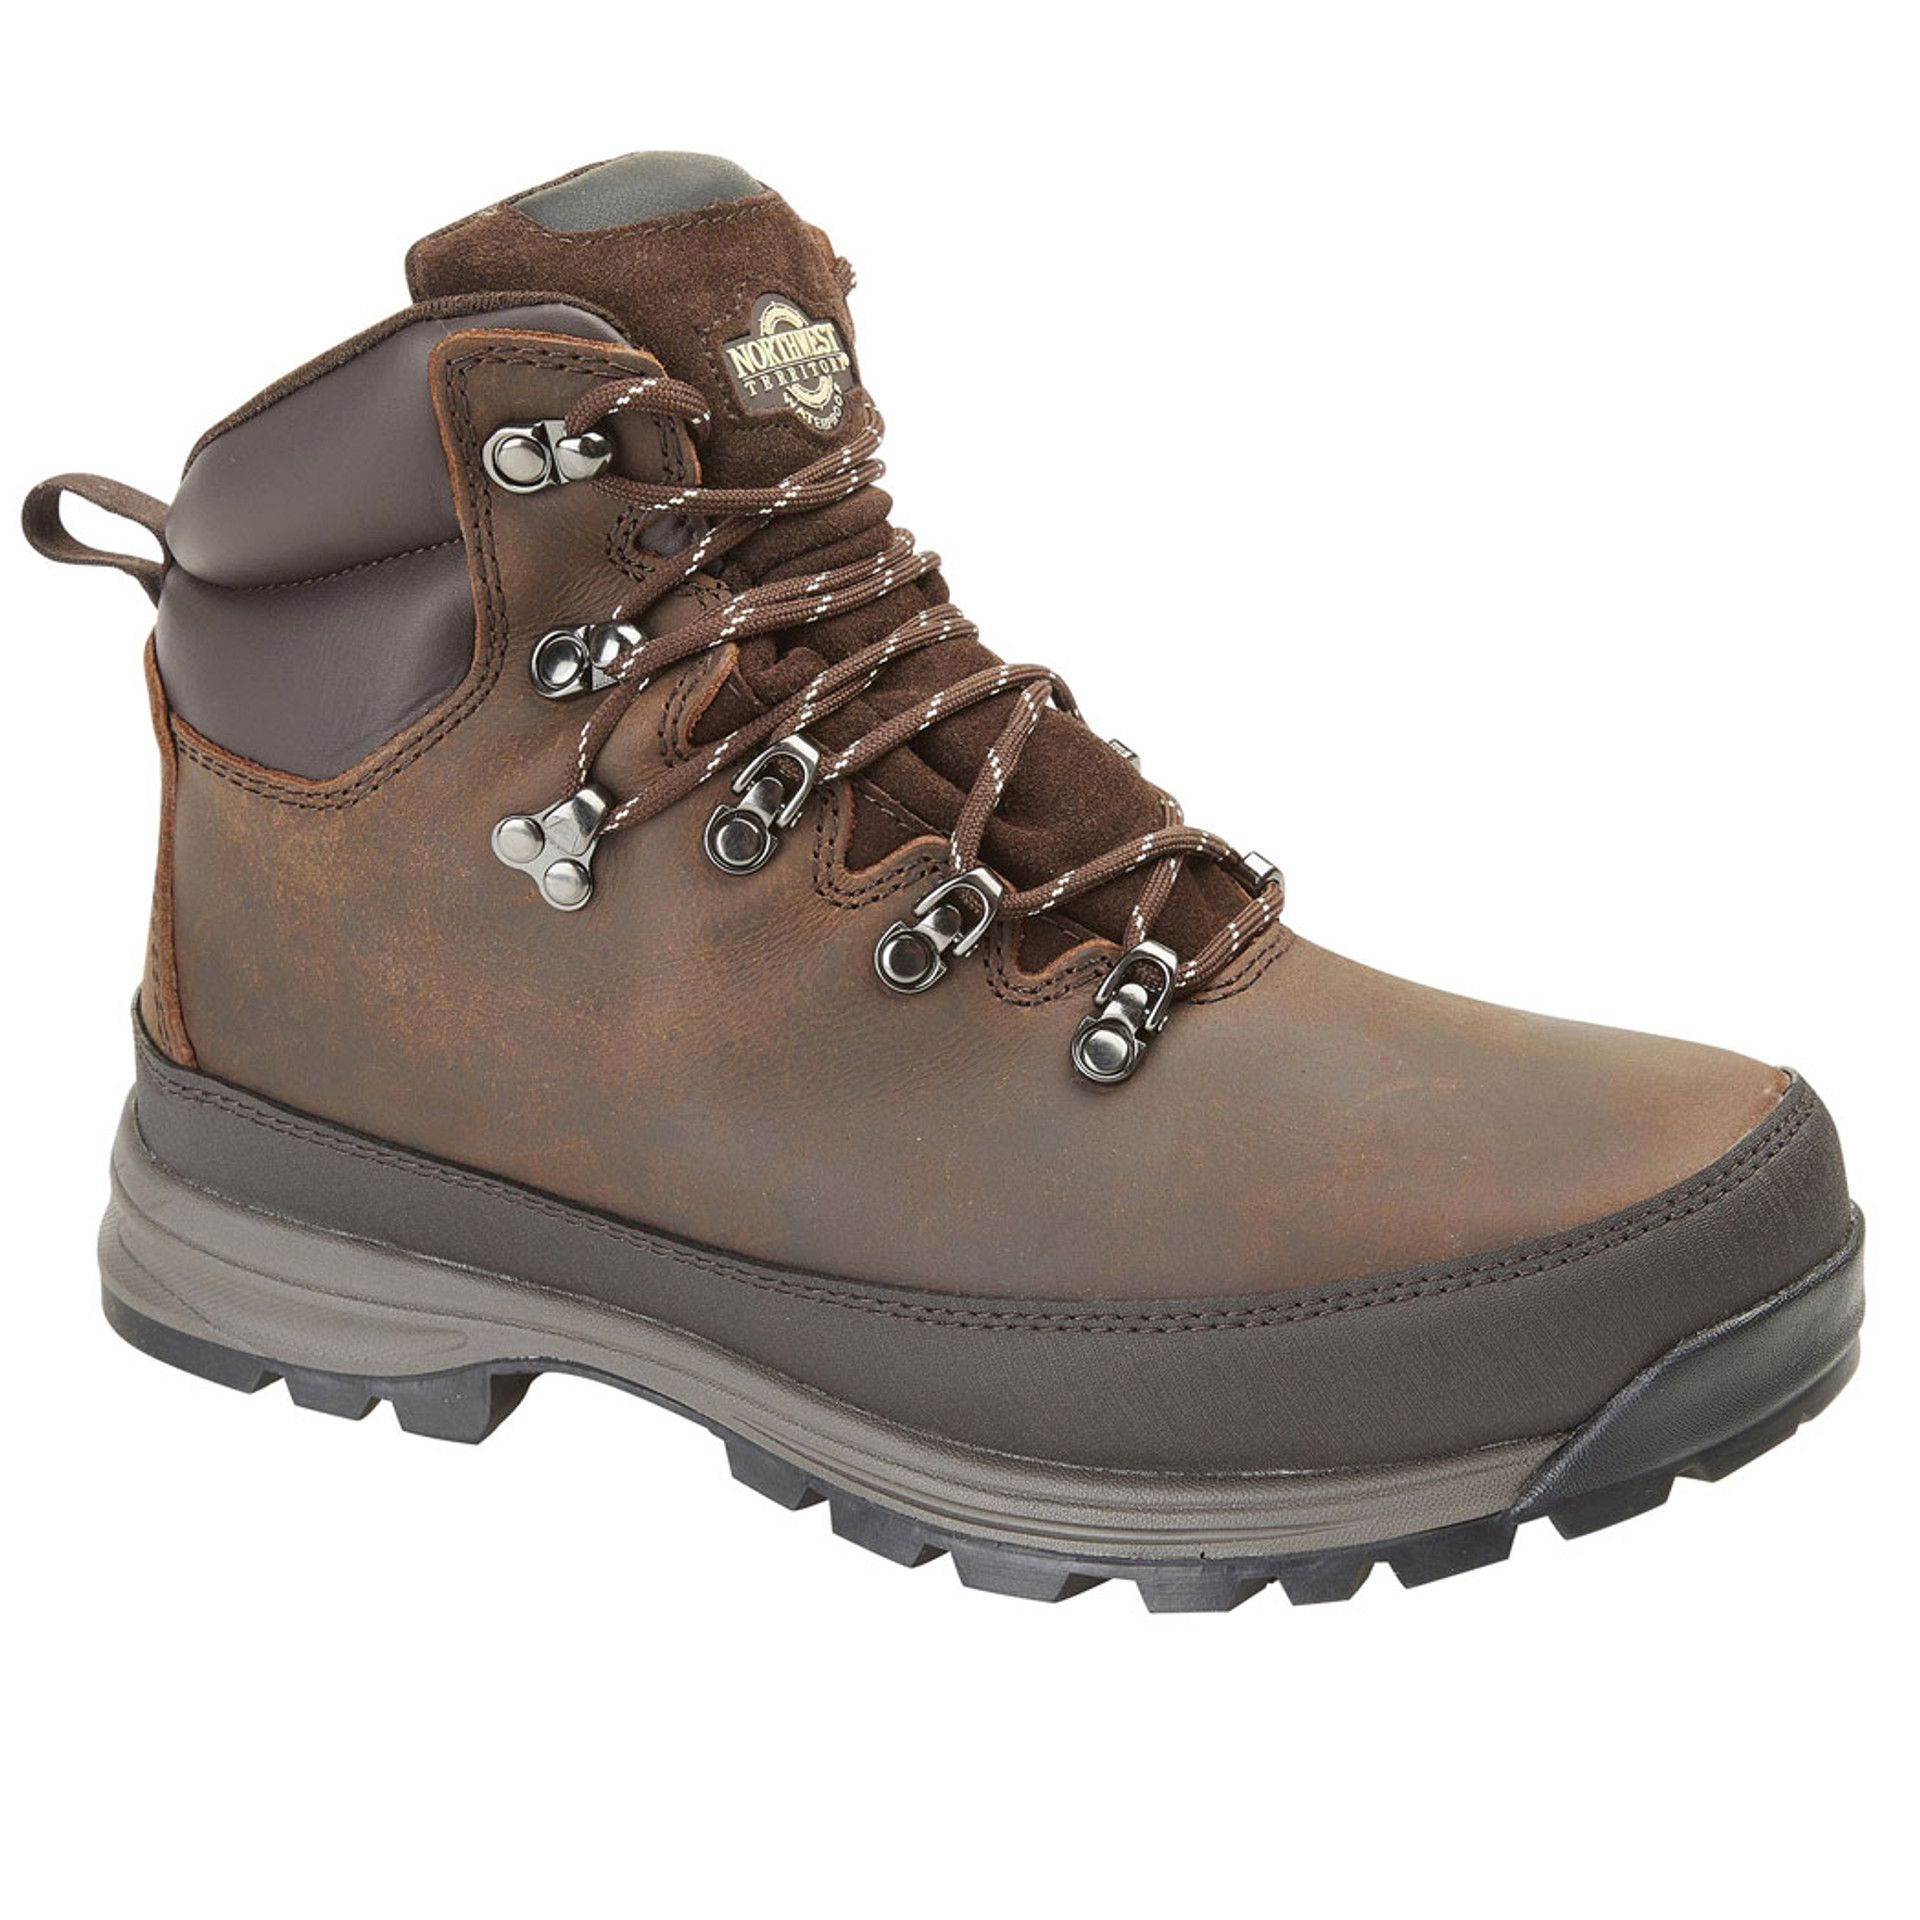 Northwest Territory Boots | Leather Boots